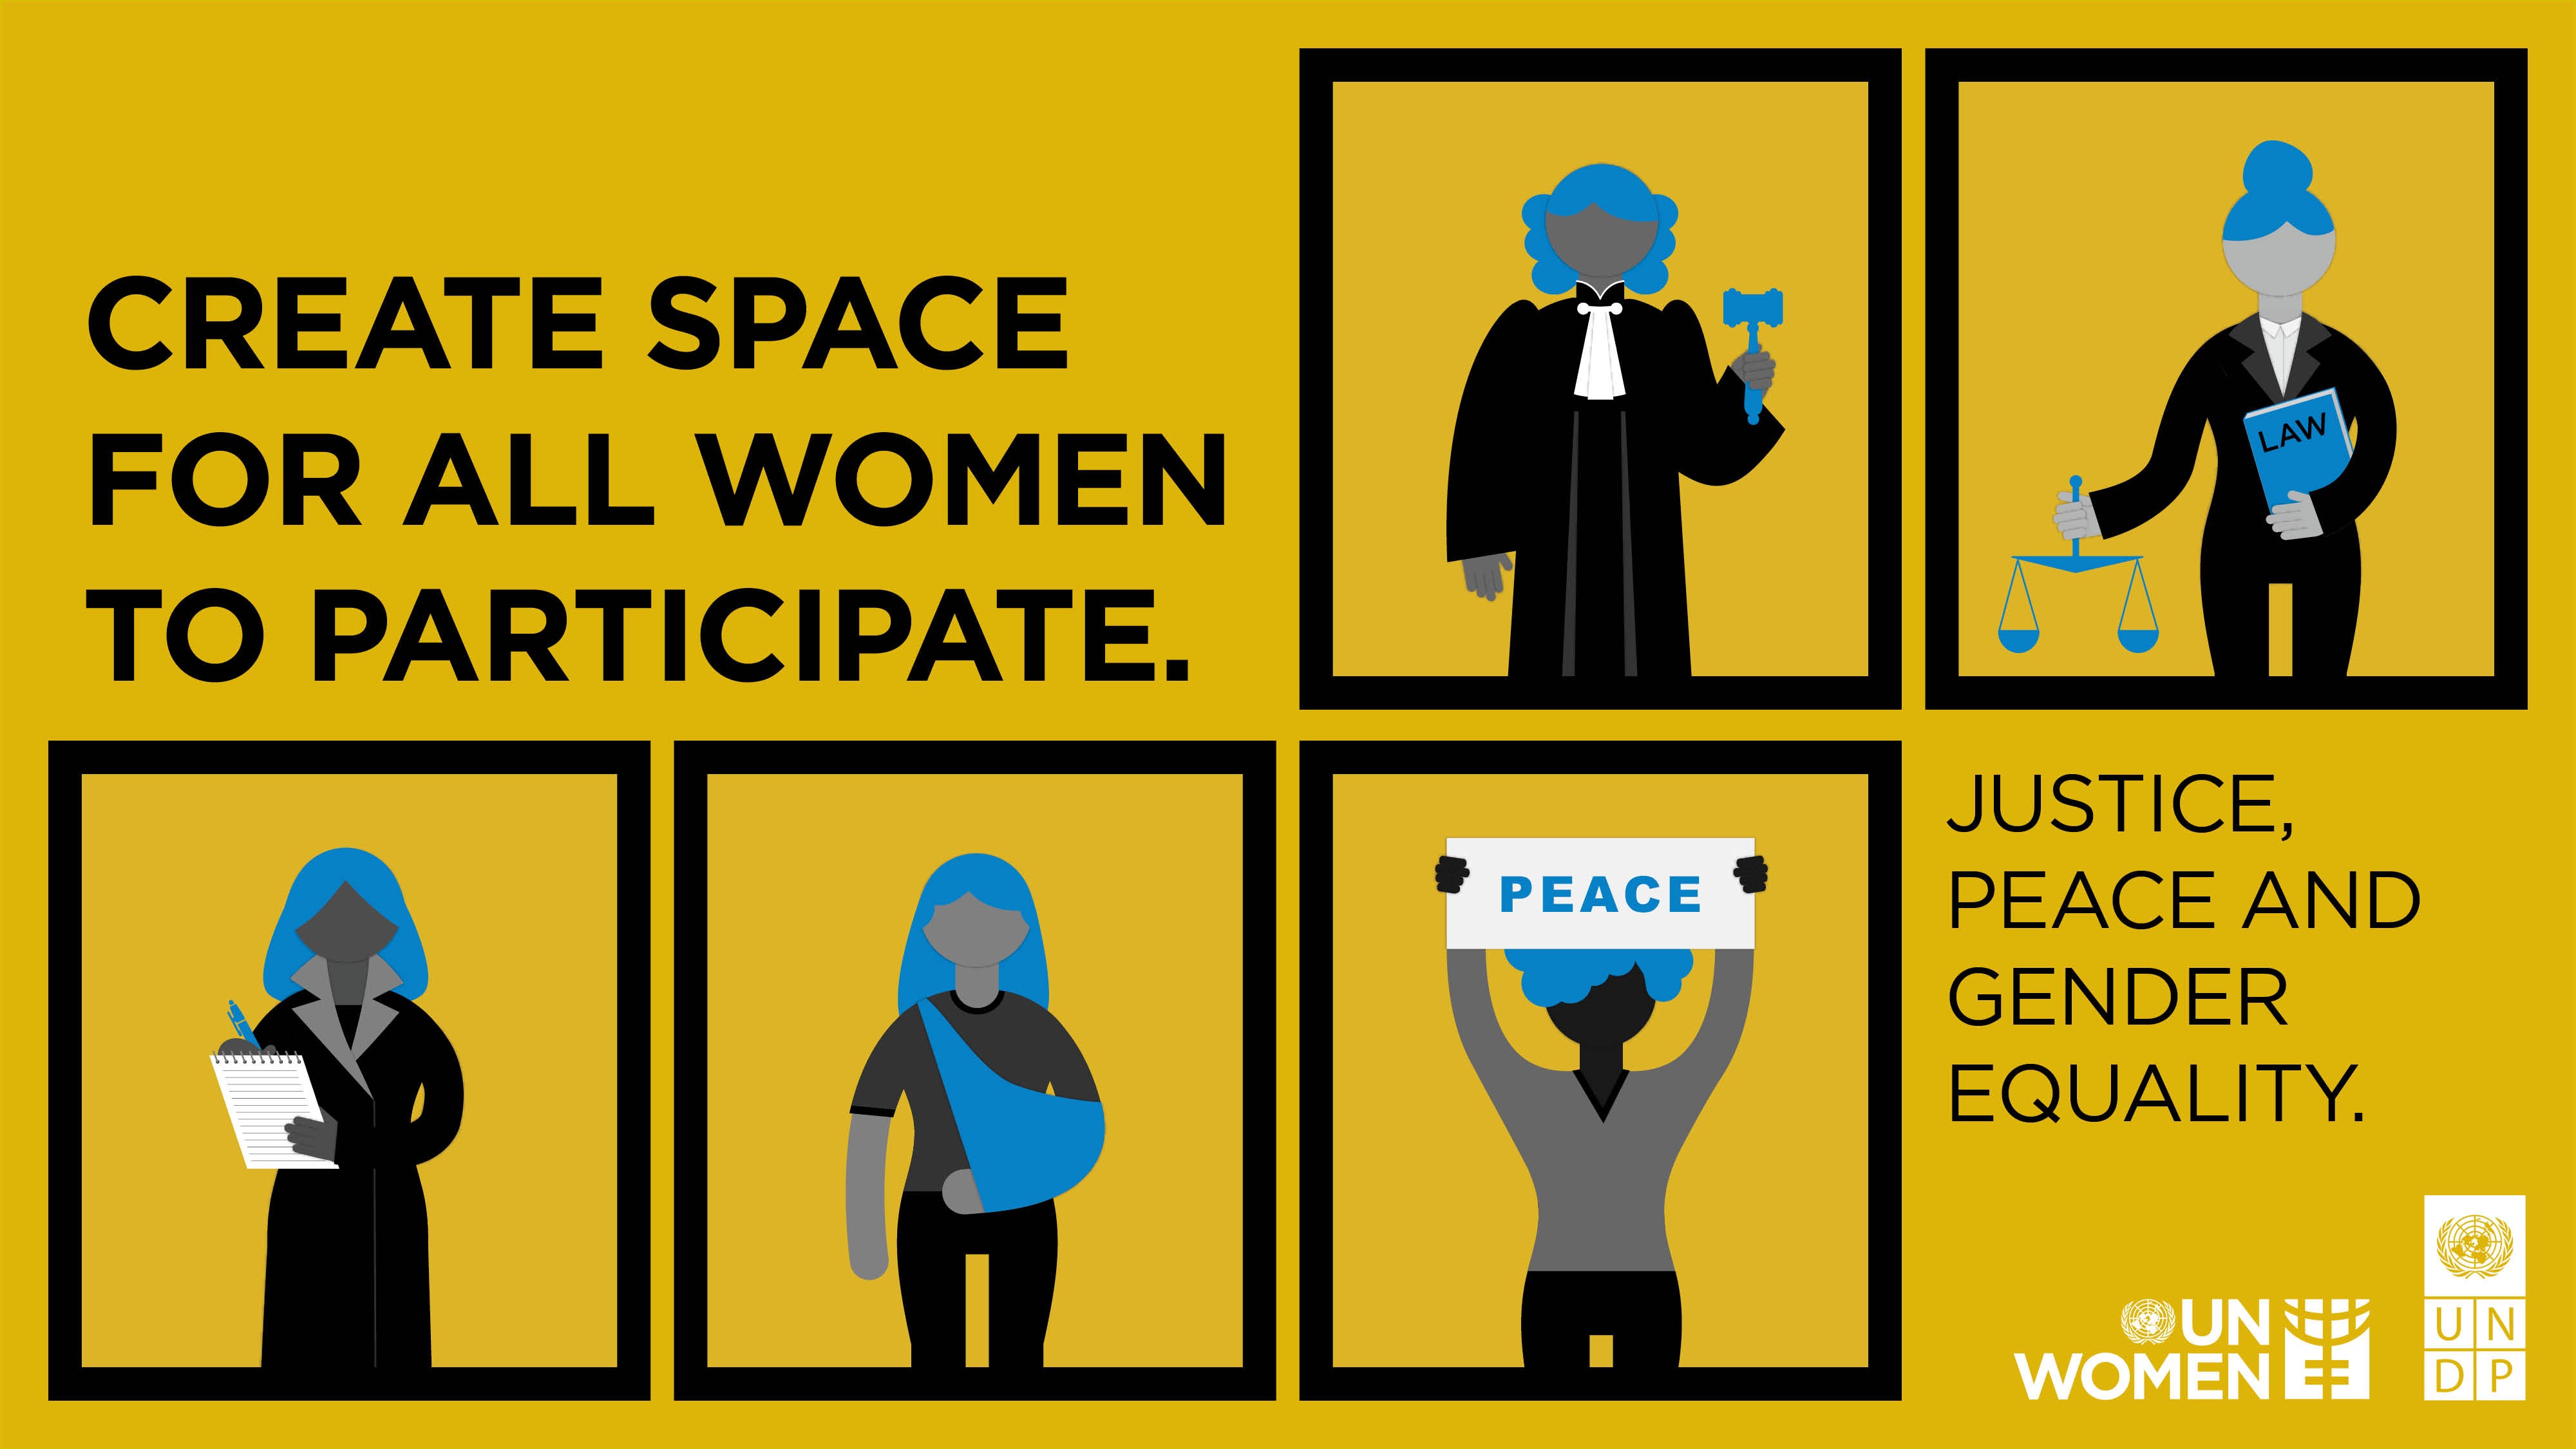 Access to justice for women and girls: UNDP and UN Women launched